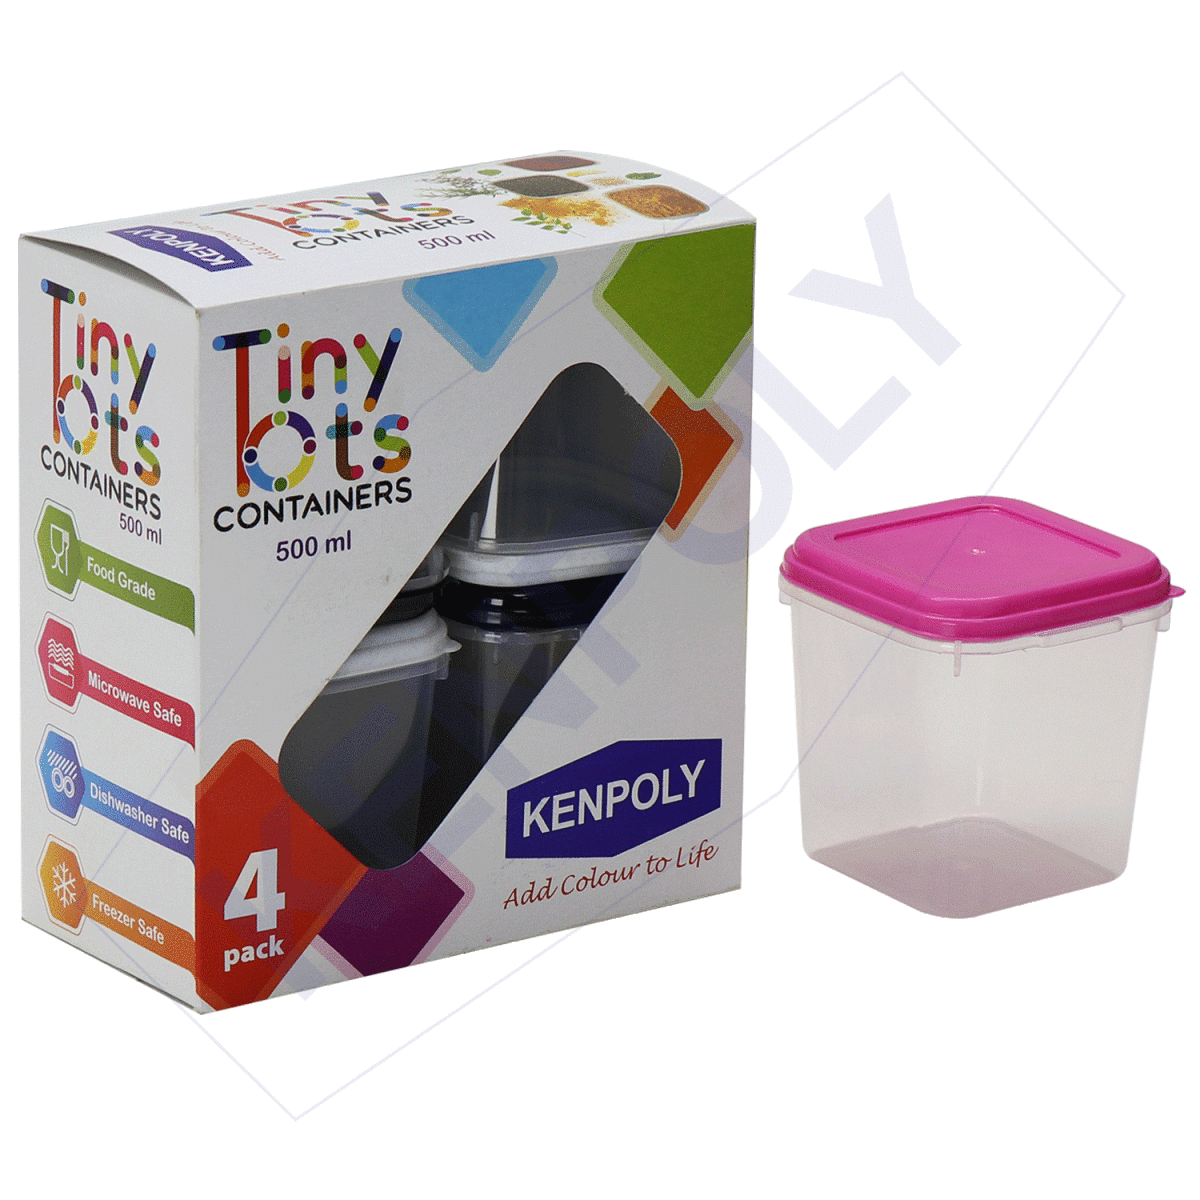 Tiny Tots Containers 500 ml